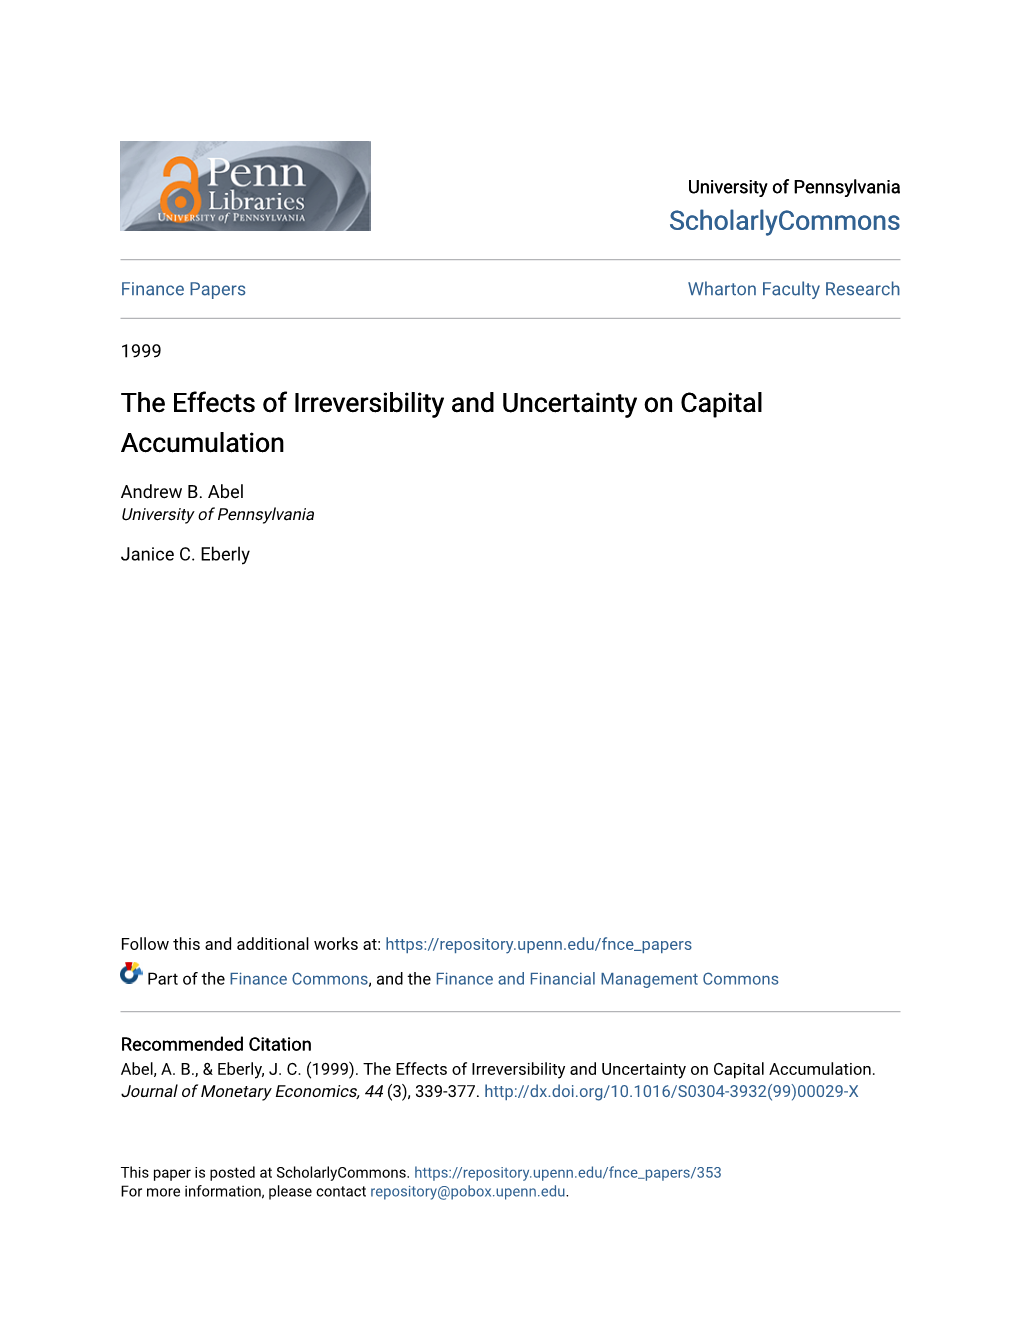 The Effects of Irreversibility and Uncertainty on Capital Accumulation